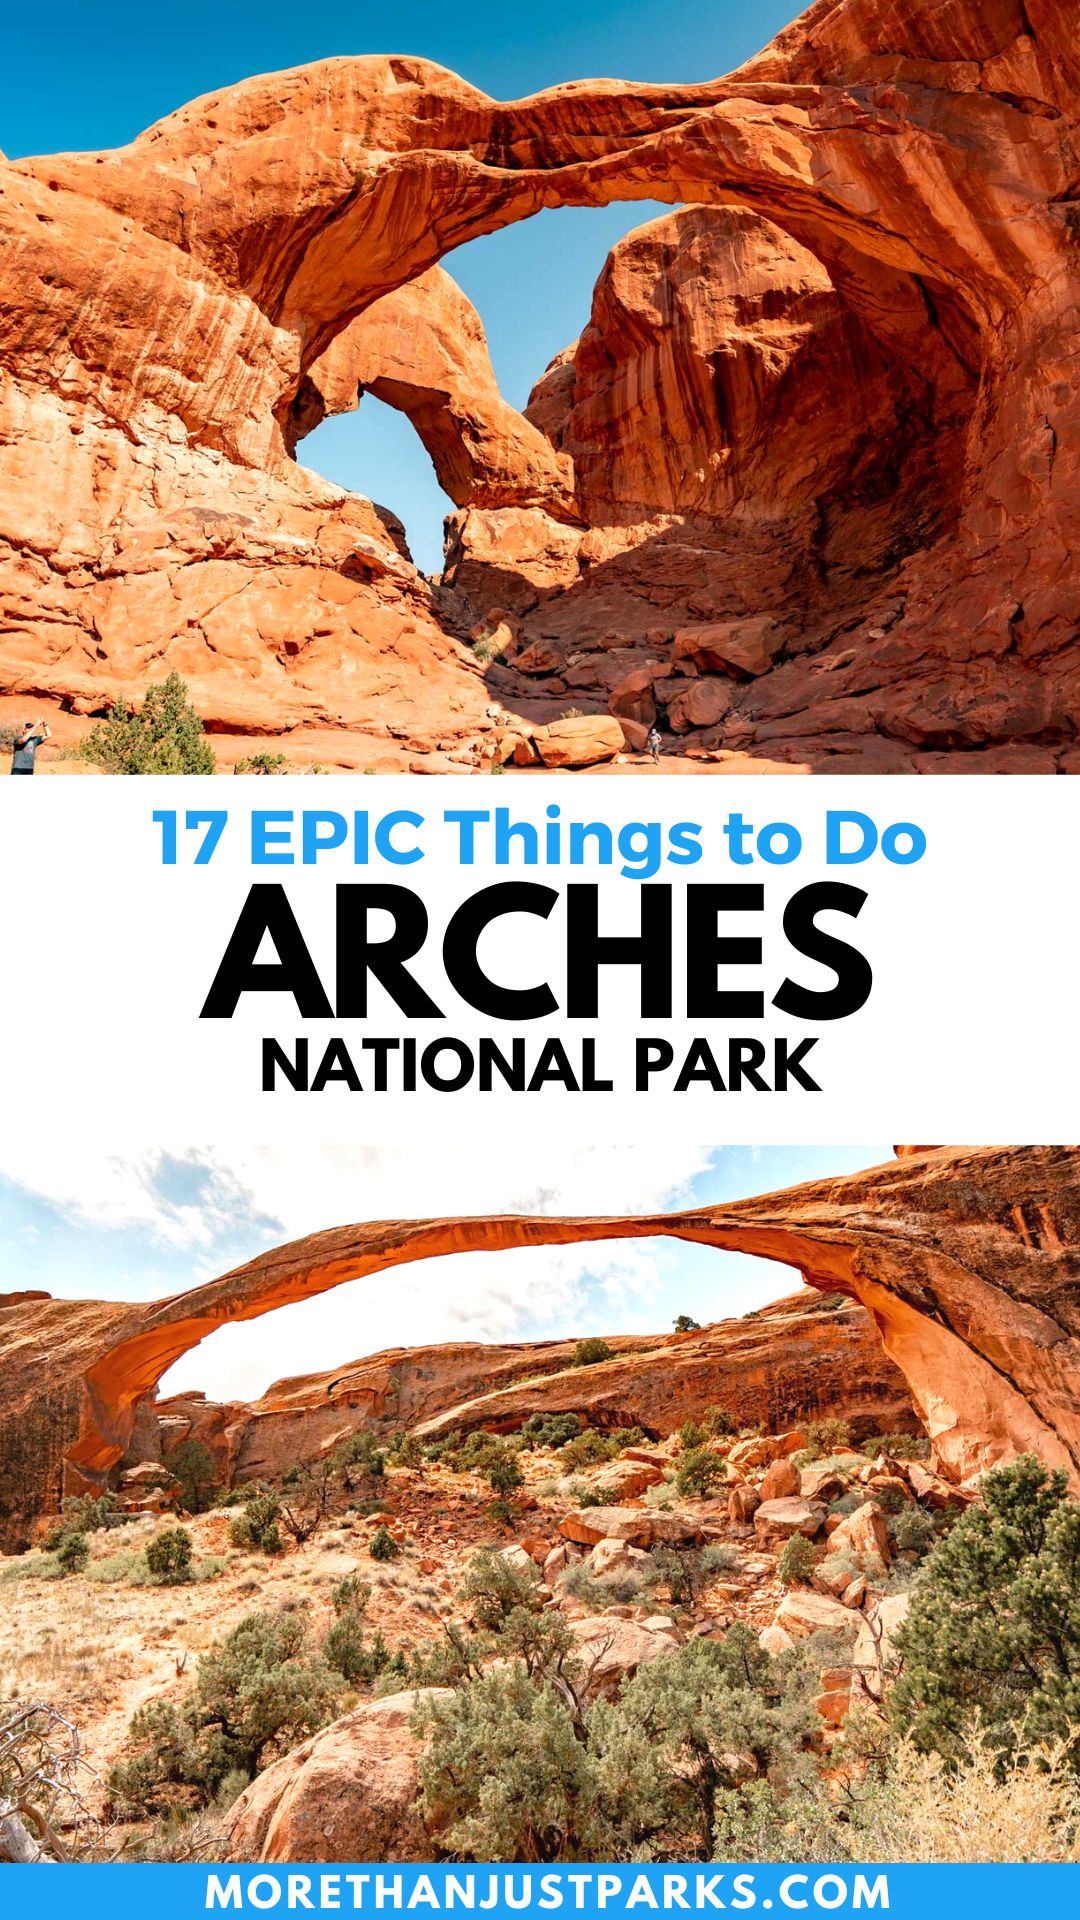 Graphic reads "17 Epic Things to Do in Arches National Park.